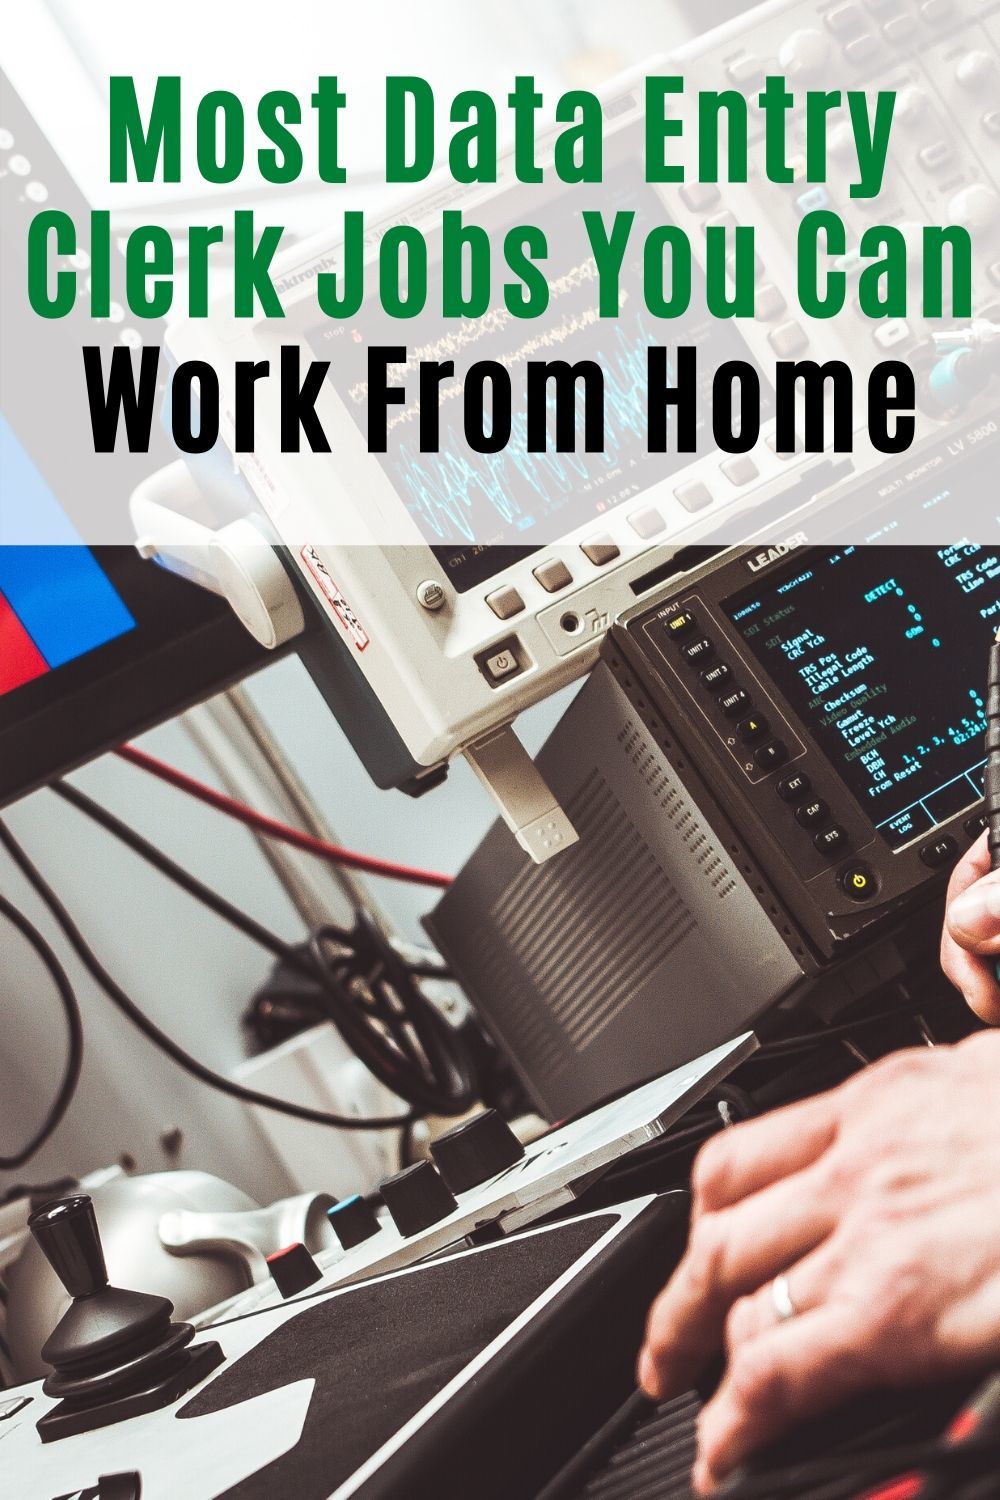 Most Data Entry Clerk Jobs You Can Work from Home